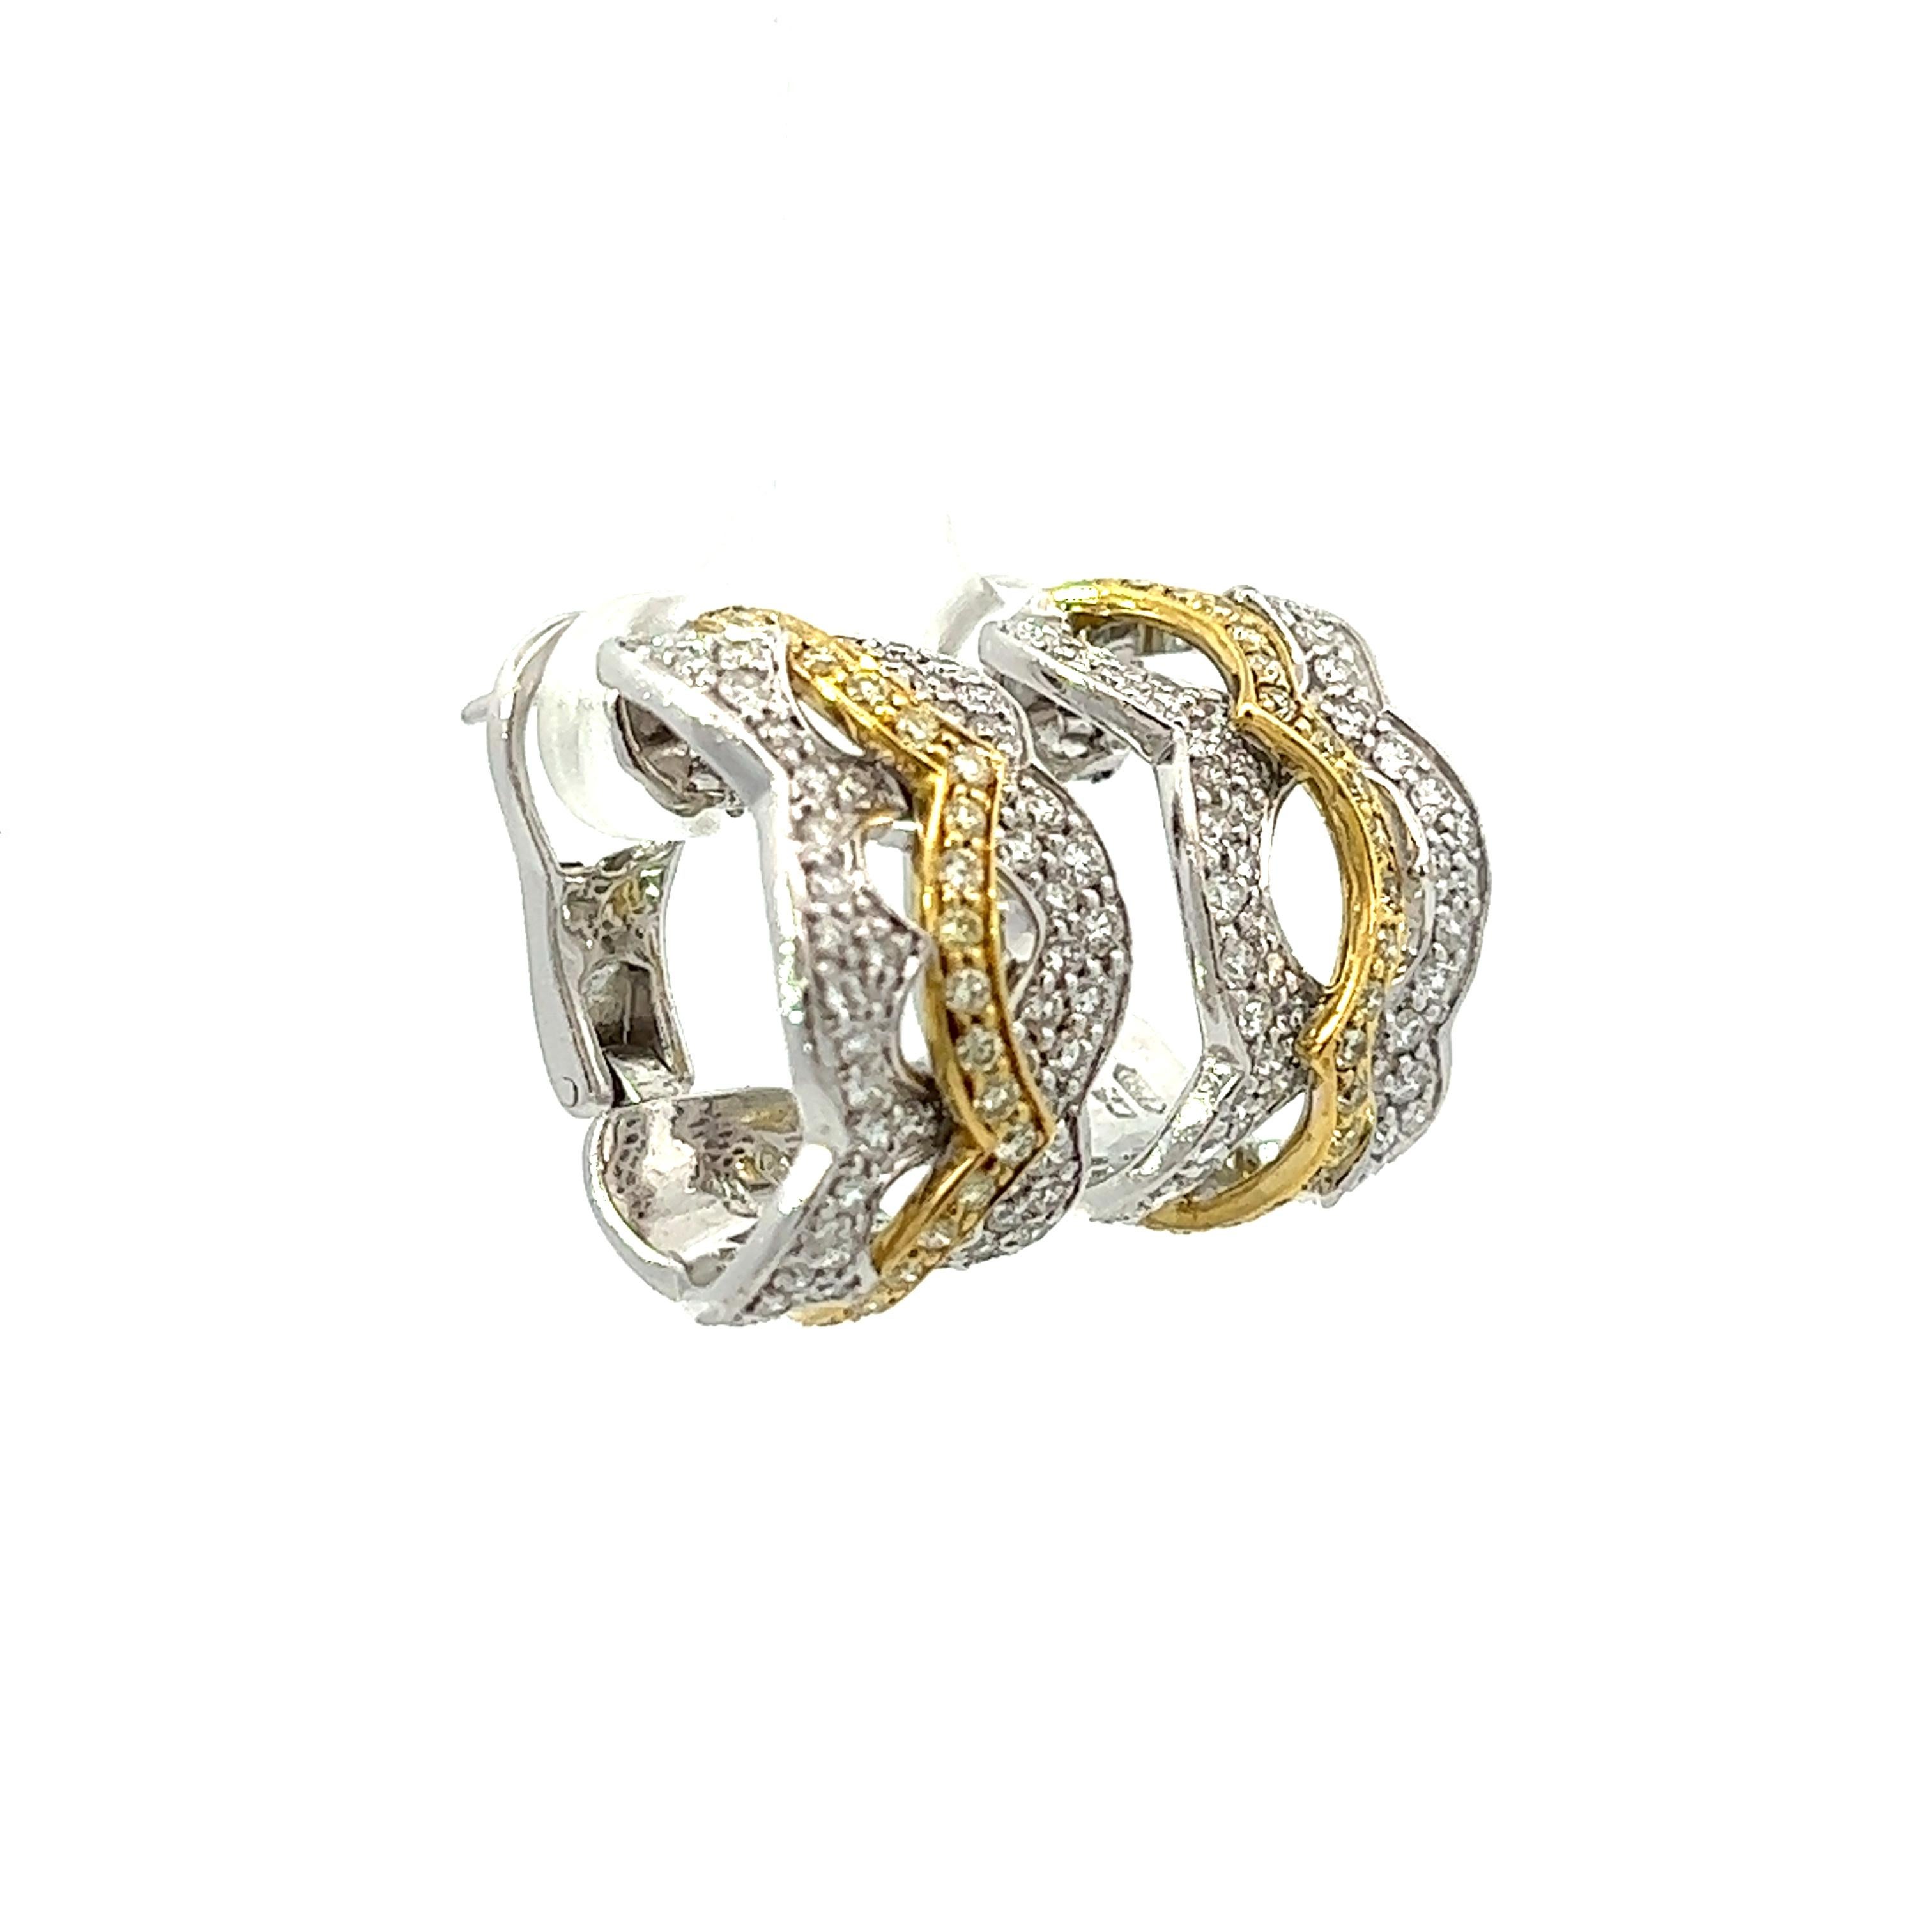 These earrings are a one-of-a-kind combination of 18k yellow and white gold with round diamonds. They are sure to impress and make an excellent gift for someone dear to you, whether it be your mother, grandmother, or anyone else. These earrings are